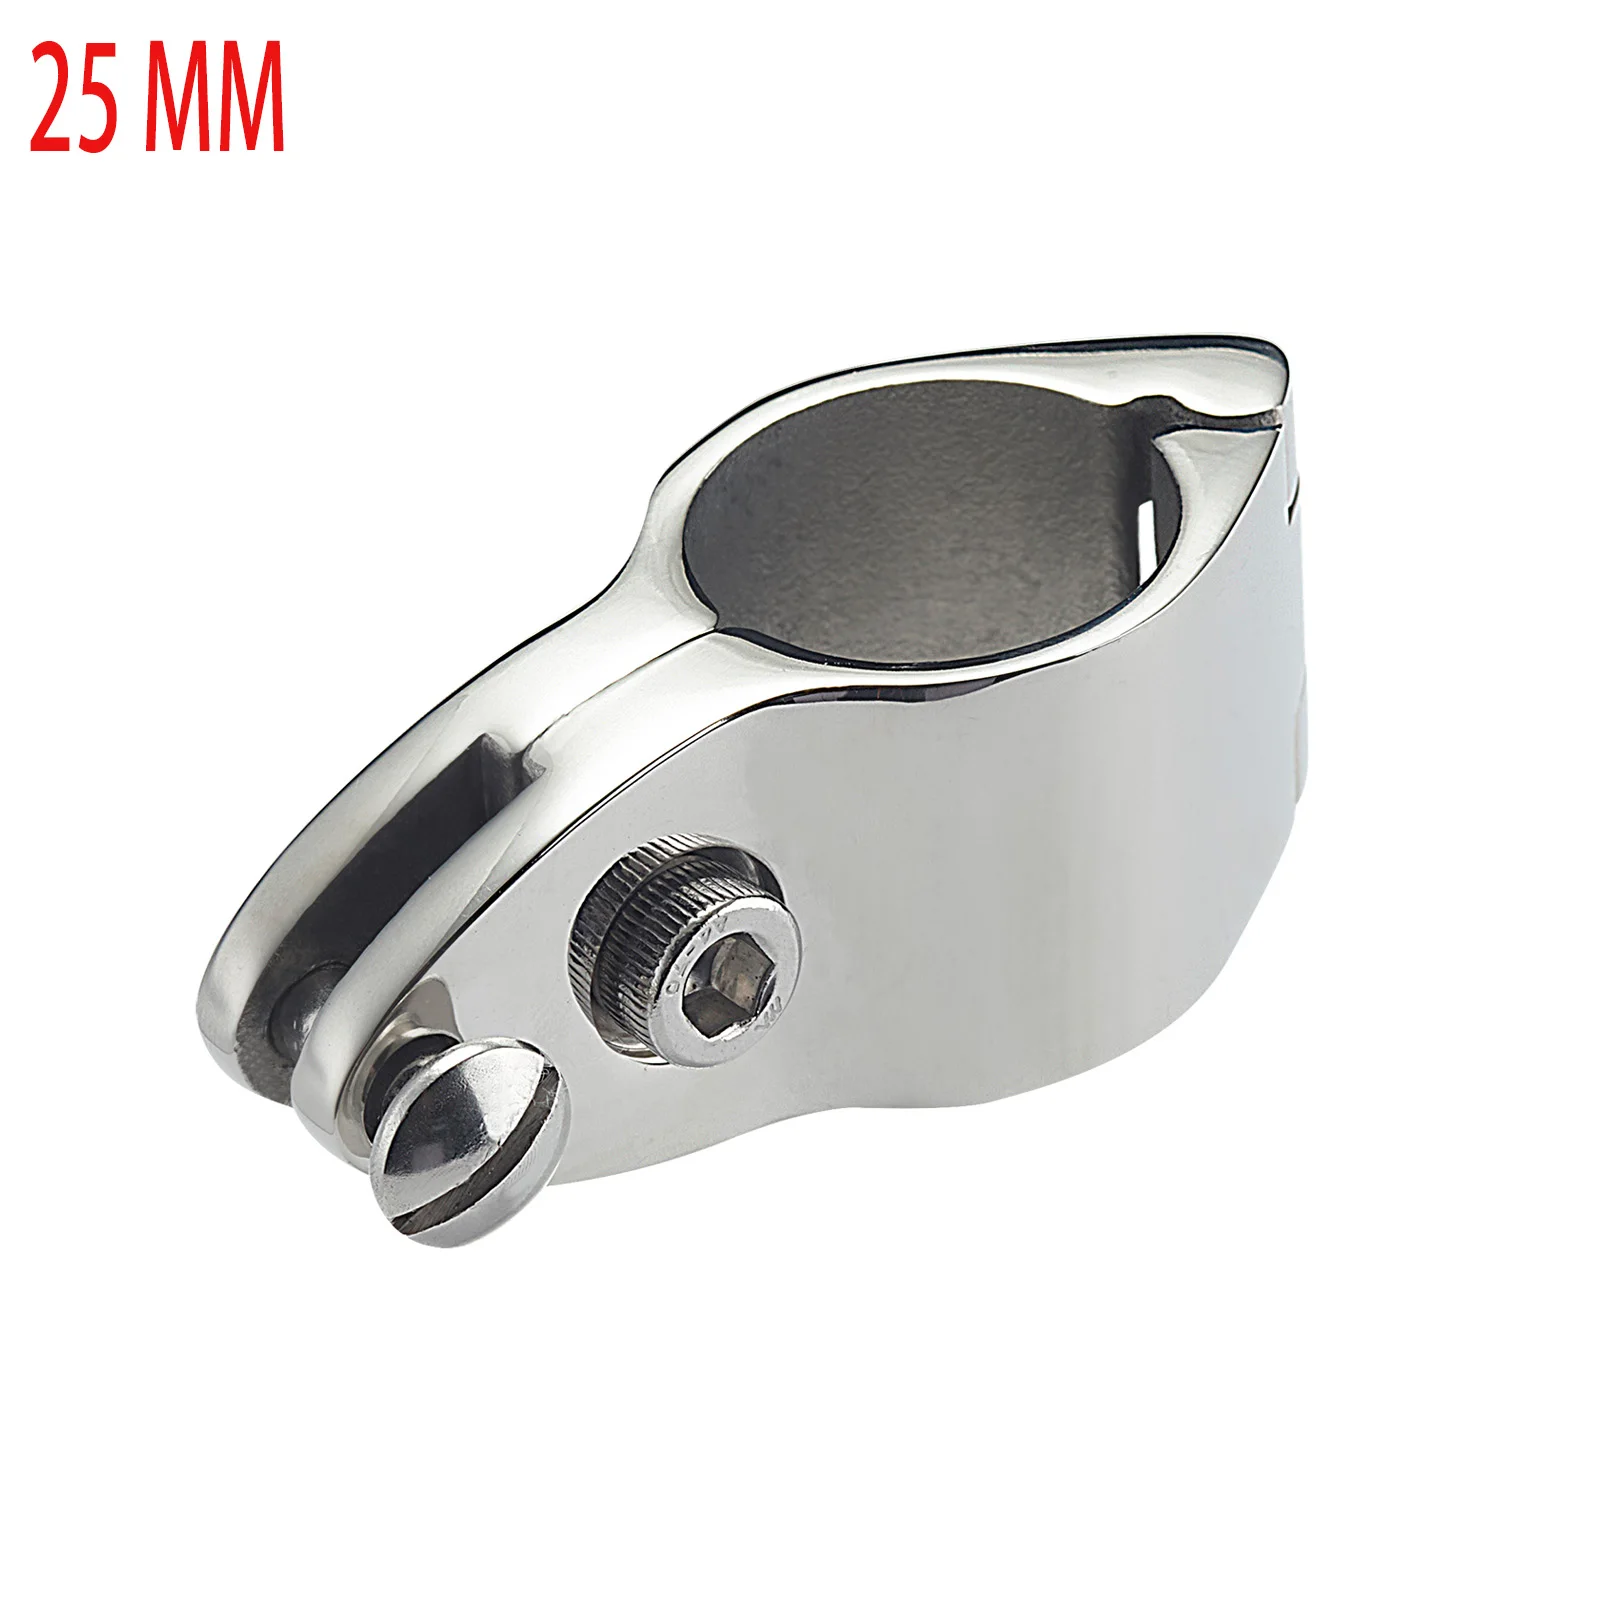 25 MM Bimini Top Jaw Slides 316 Stainless Steel, for 1 Inch OD Round Tubing, Marine Hardware